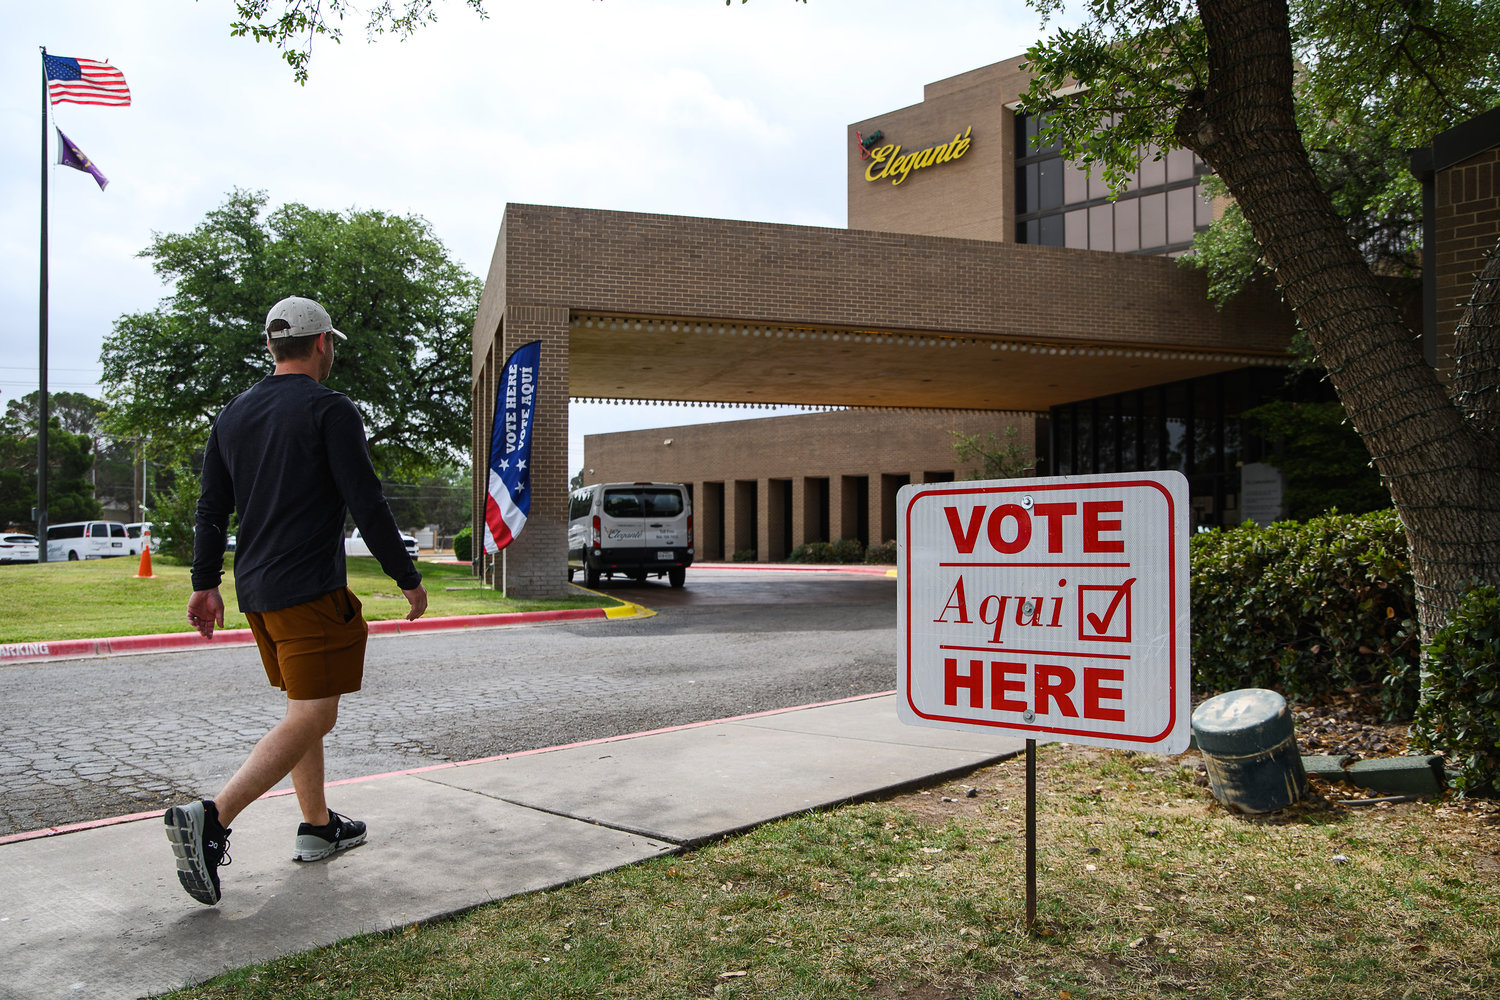 Voter Austin Hall walks into a polling location to cast his vote in the joint primary runoff election, Tuesday, May 24, 2022, in Odessa, Texas. (Eli Hartman/Odessa American via AP)